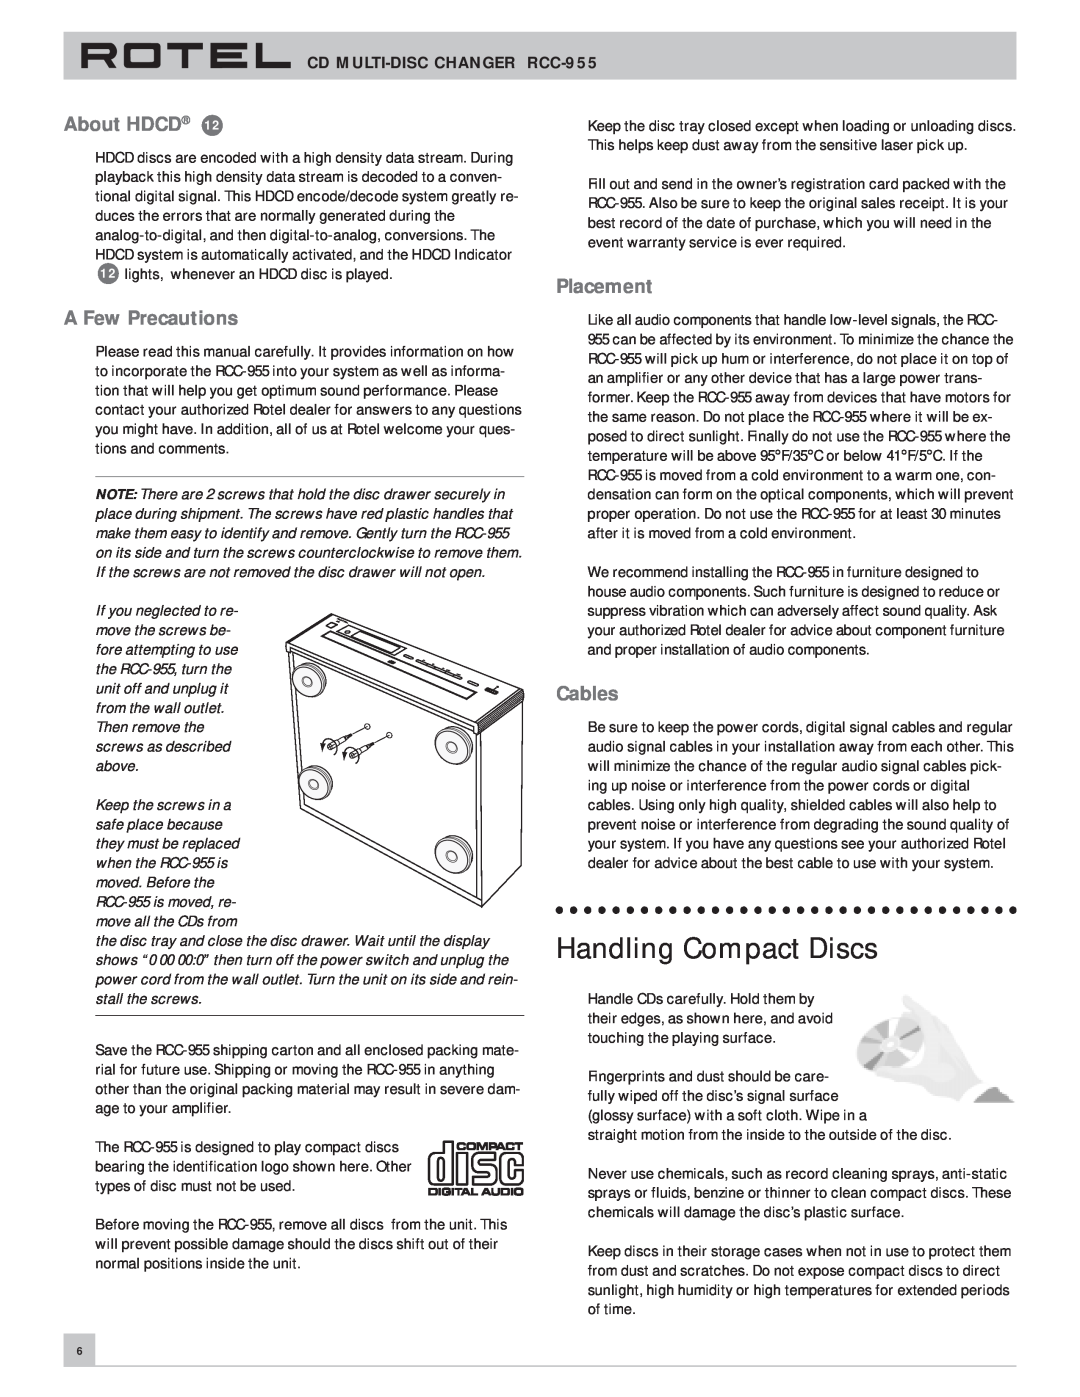 Rotel RCC-955 owner manual Handling Compact Discs, About HDCD, A Few Precautions, Placement, Cables 